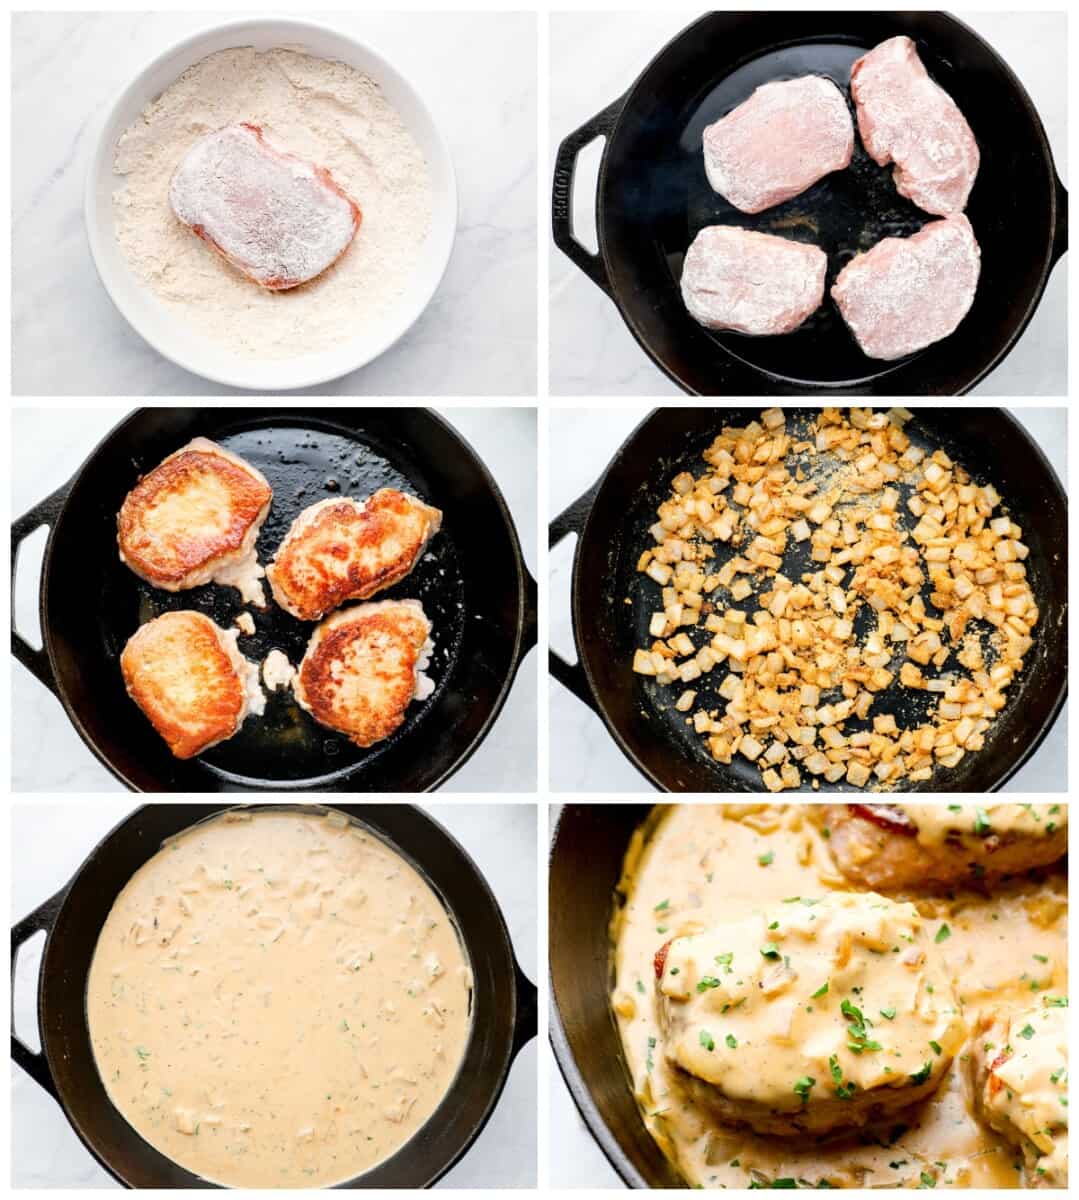 how to make smothered pork chops step by step photo instructions